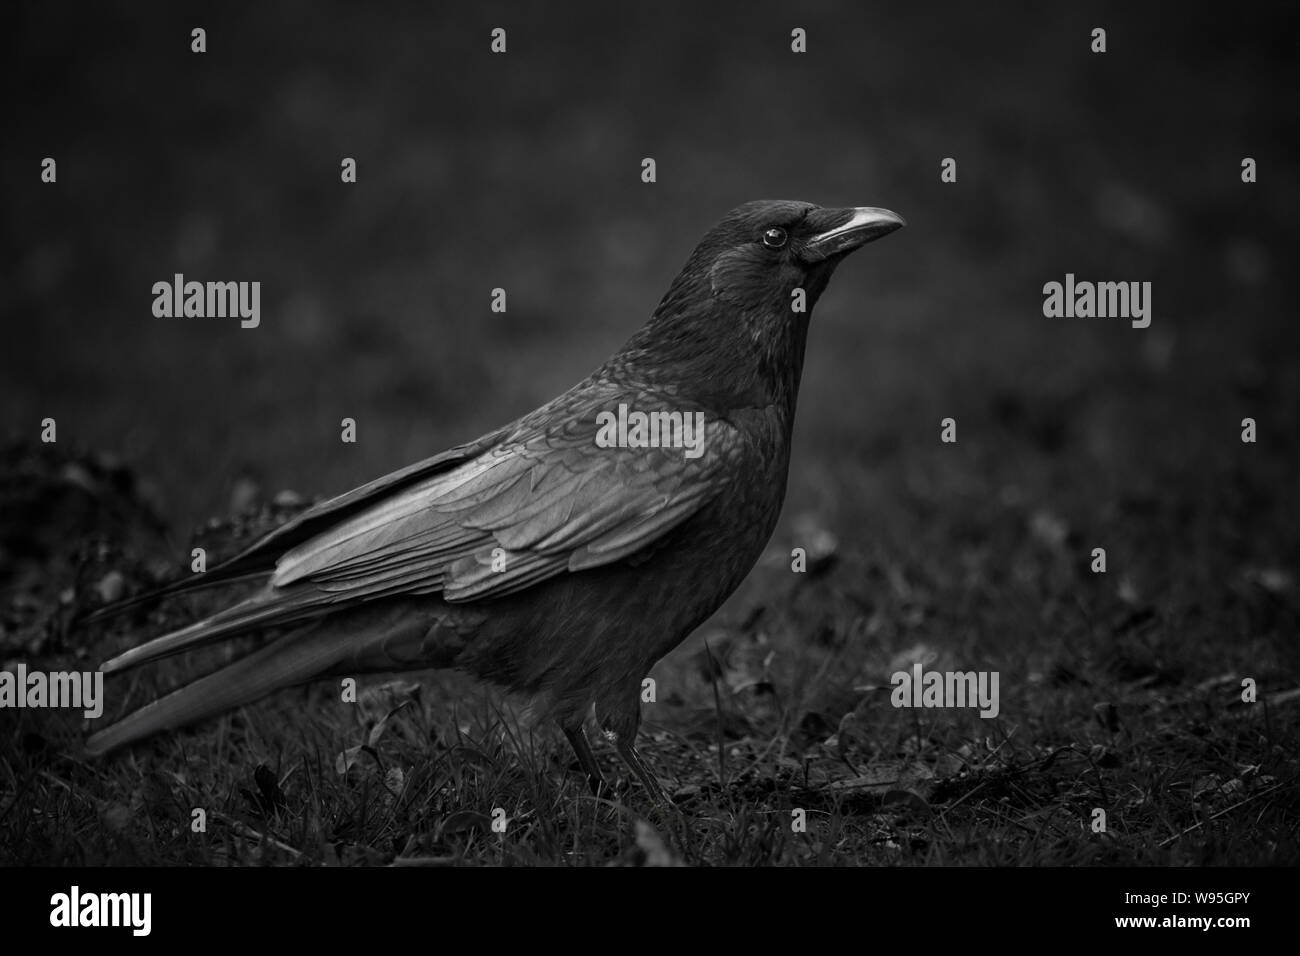 Close-up of a single crow (corvus) in black & white Stock Photo